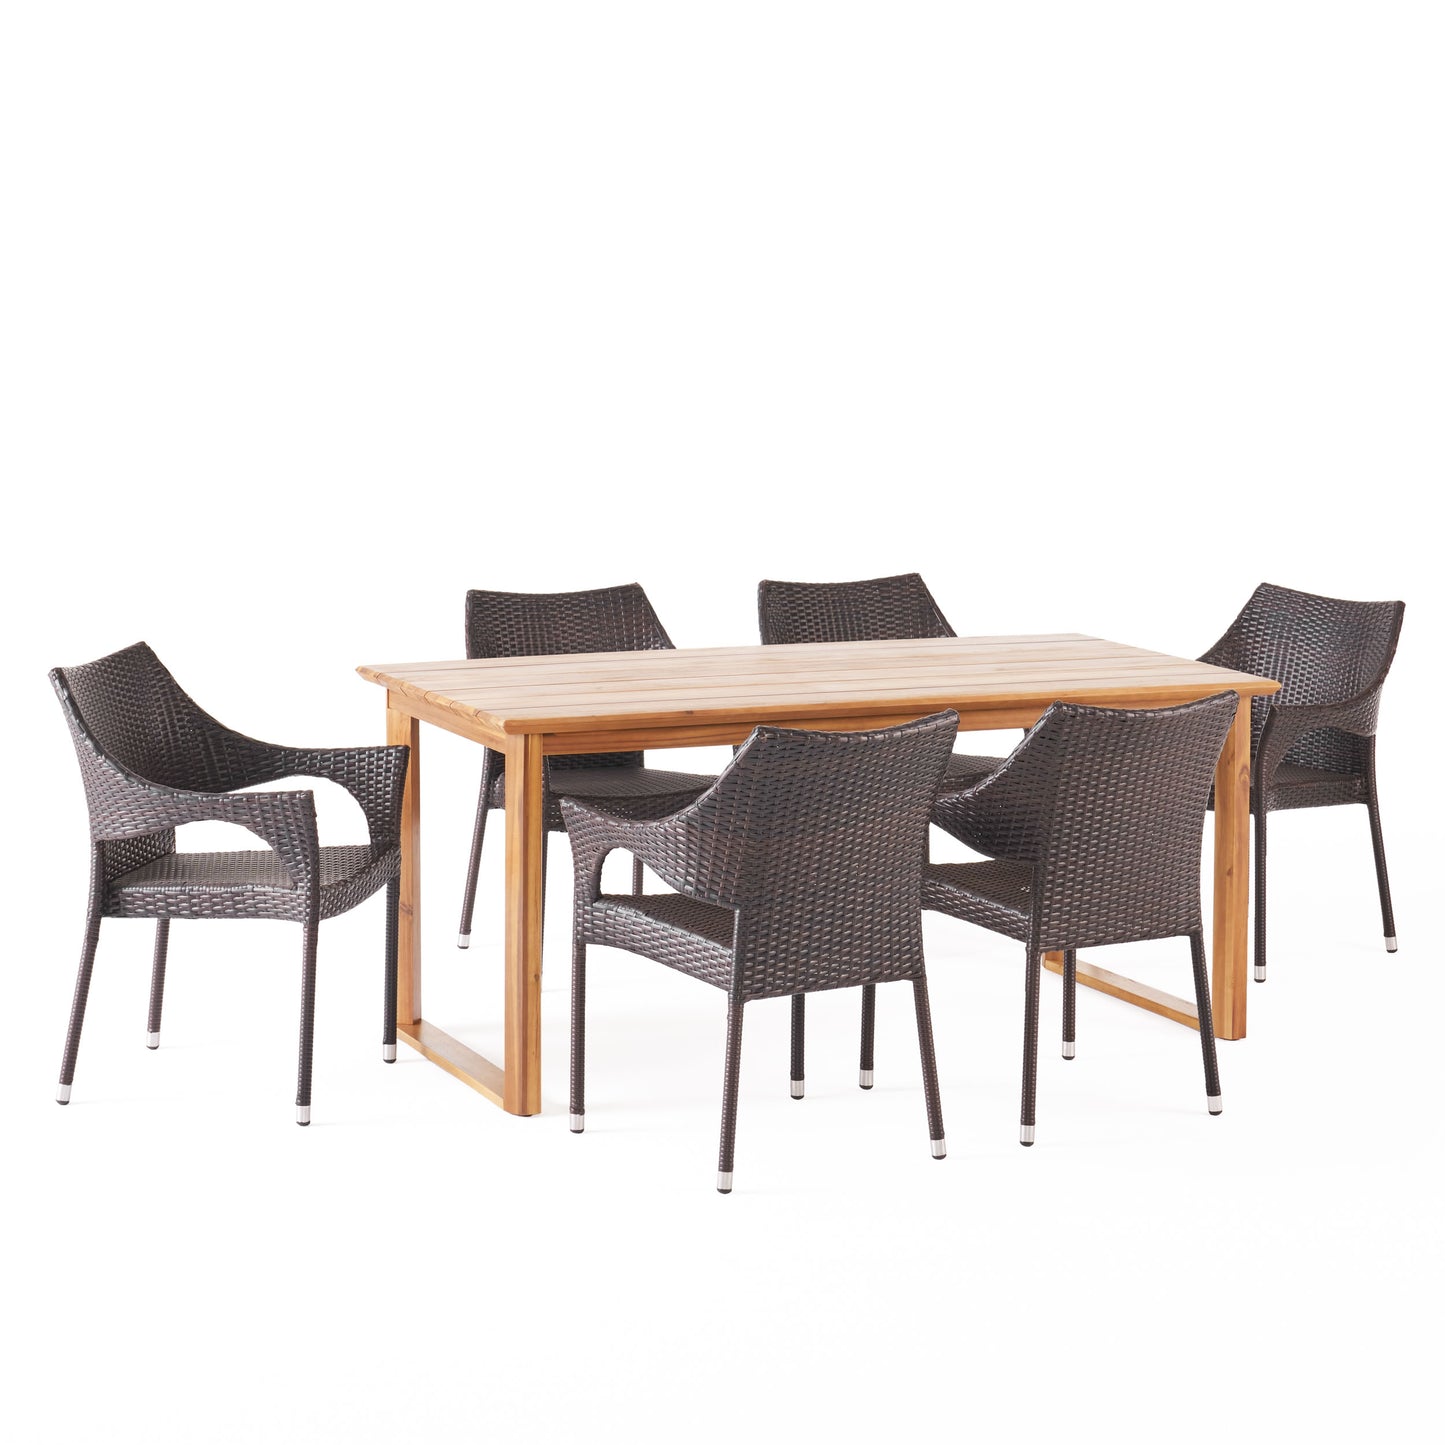 Ellendale Outdoor Acacia Wood and Wicker 7 Piece Dining Set